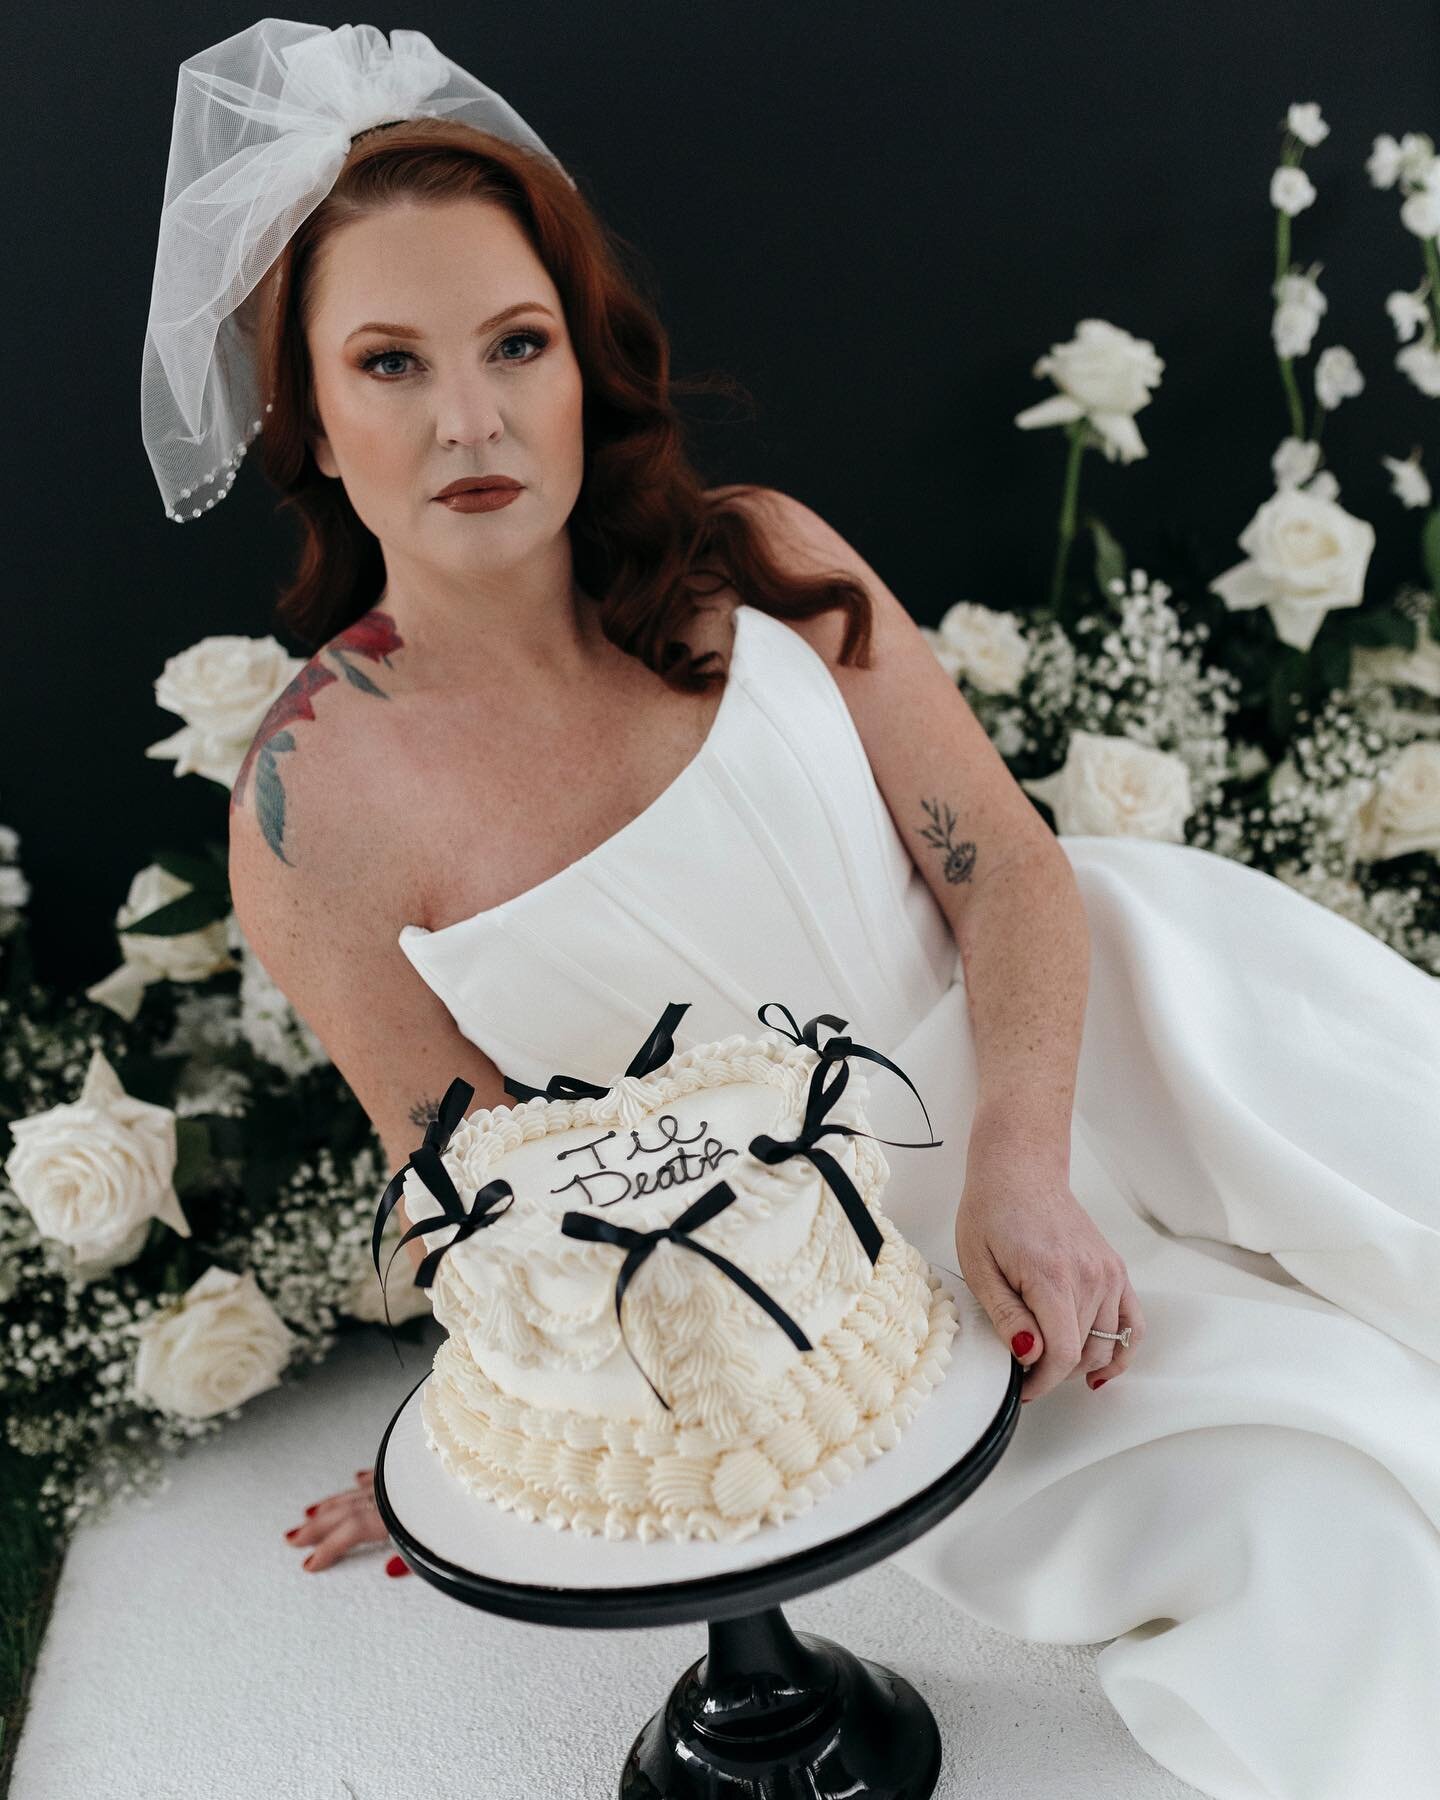 🖤I'm all here for the vintage heart cake trend!! 🖤

Love the Hollywood Glam meets Rock n' Roll Bride photo shoot that we had the pleasure of being apart of a few weeks ago!

If you are looking for an intimate wedding venue that has vintage charm, I